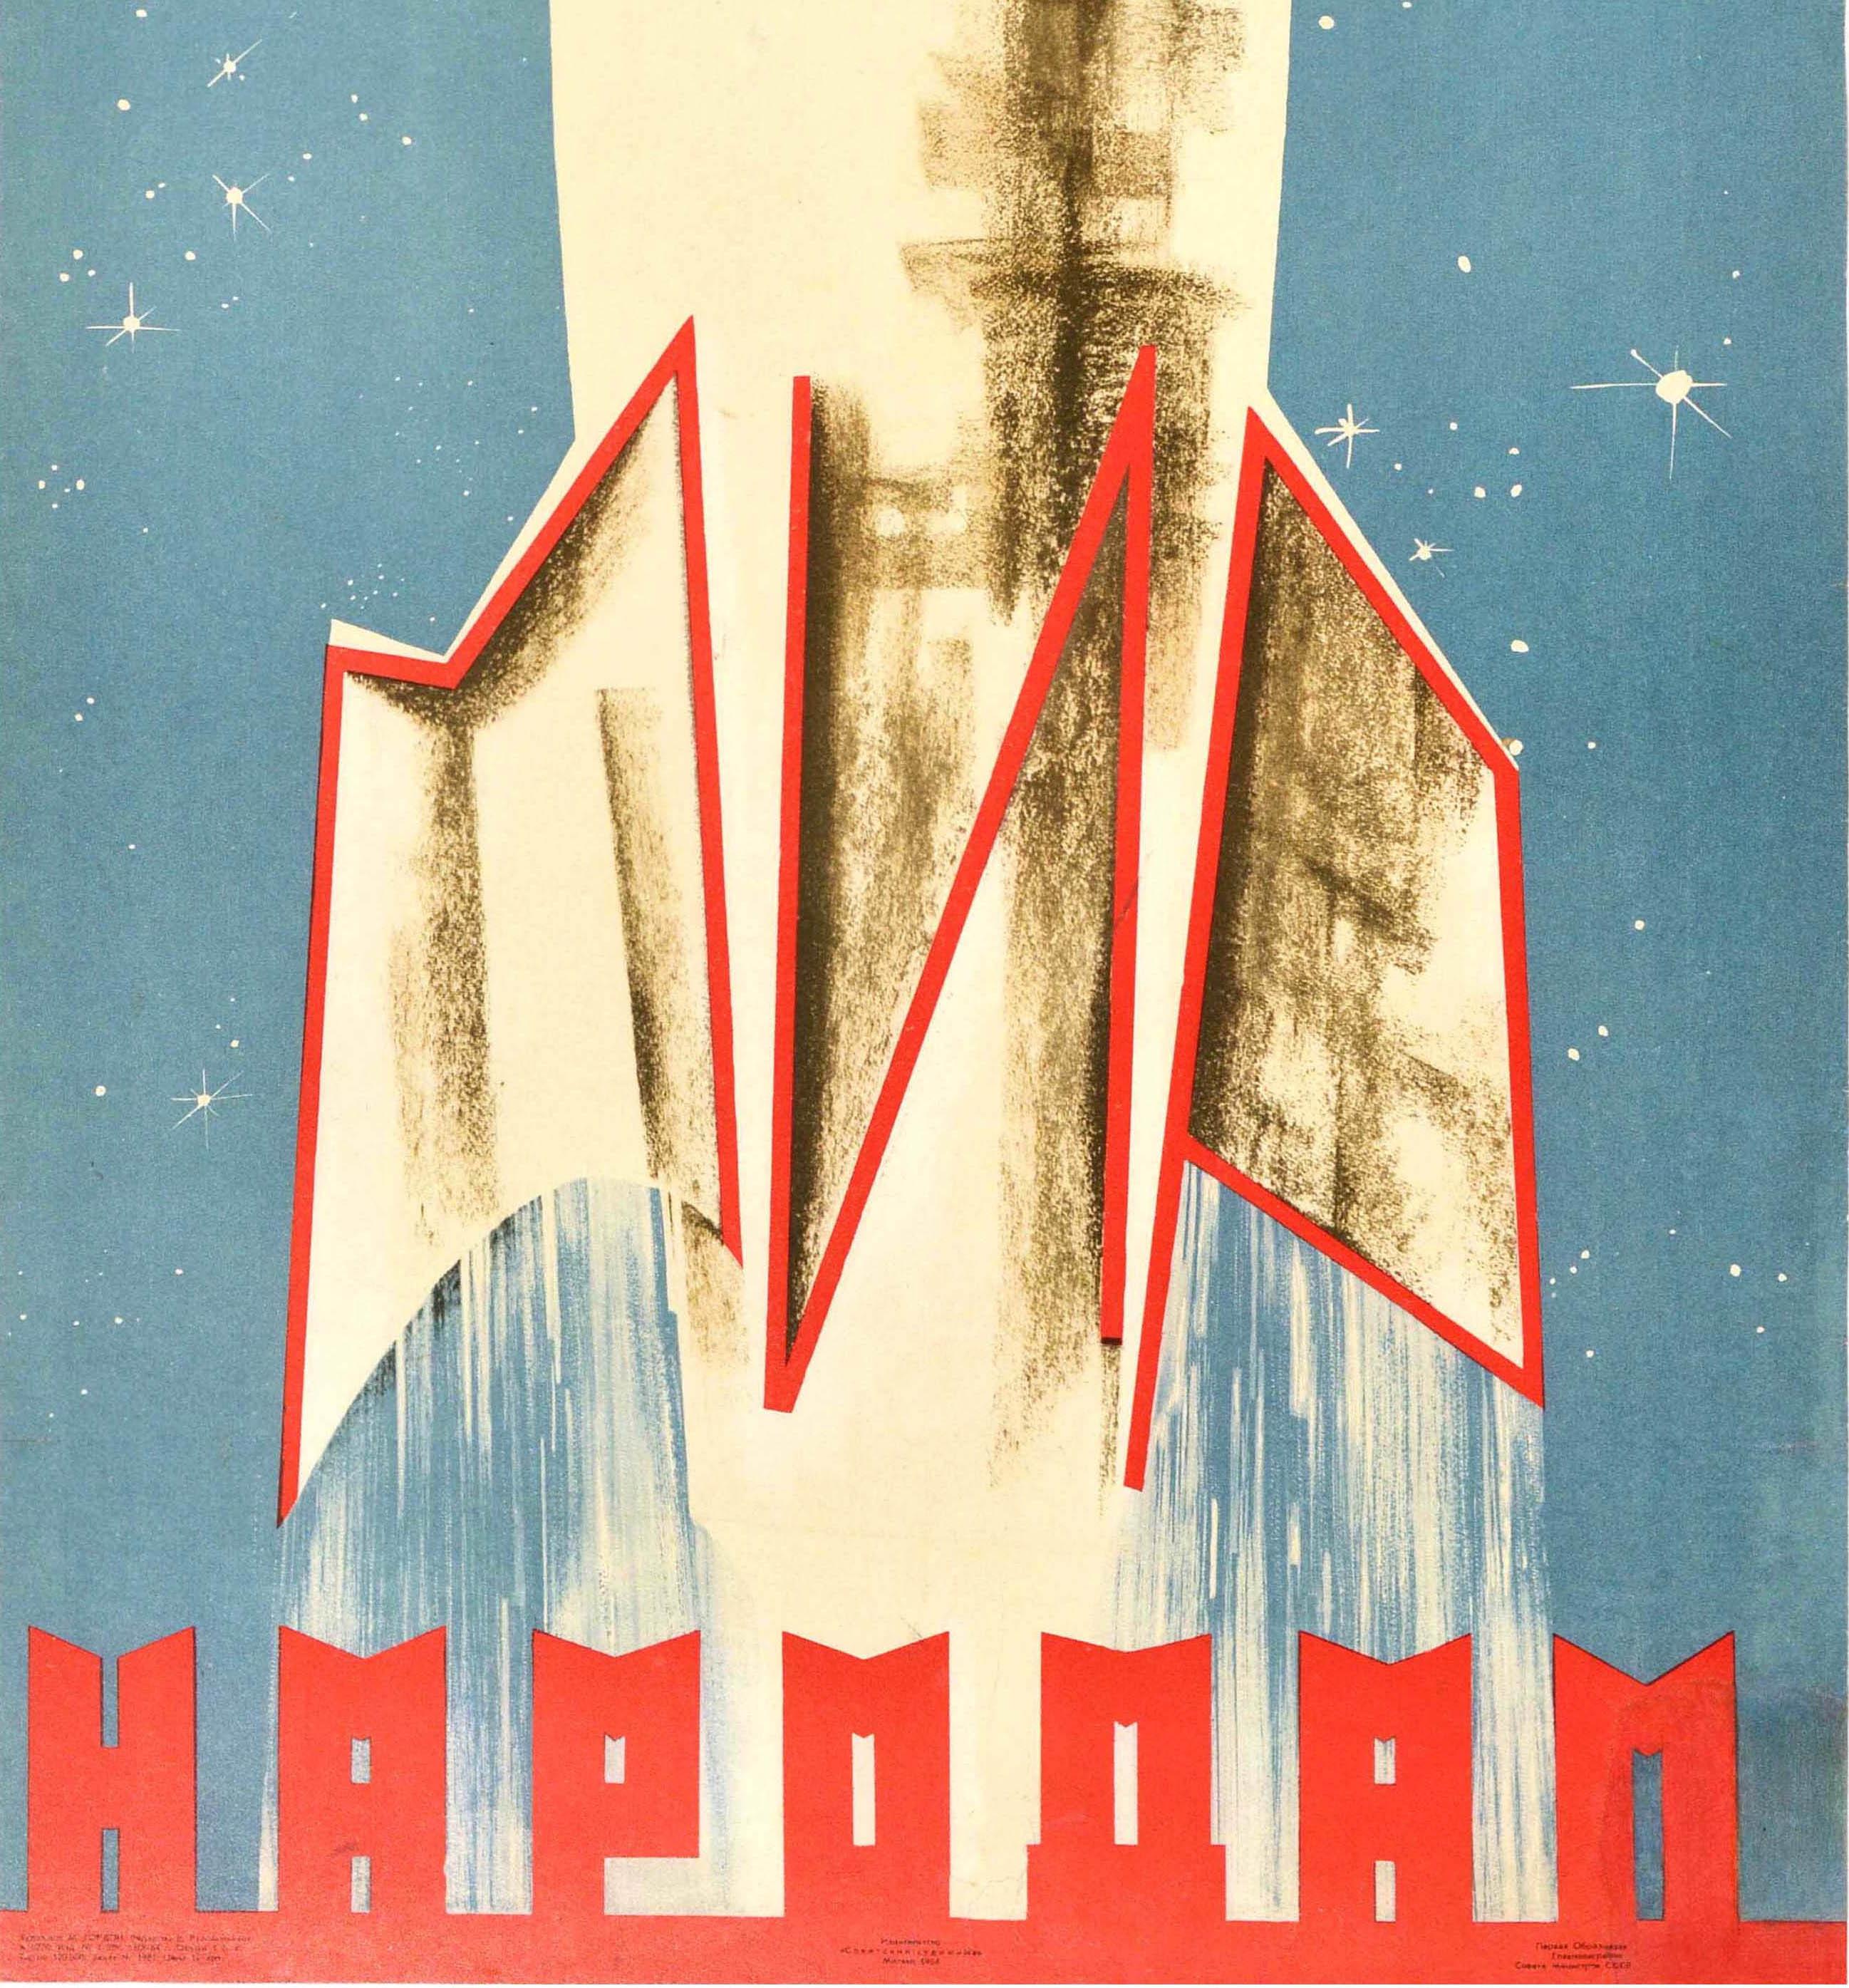 Original vintage Soviet propaganda poster - Мир Народам / Peace to the People - featuring an illustration of three cosmonauts in a rocket marked with a Soviet star against a blue starry background, the stylised text below with the word for Peace /